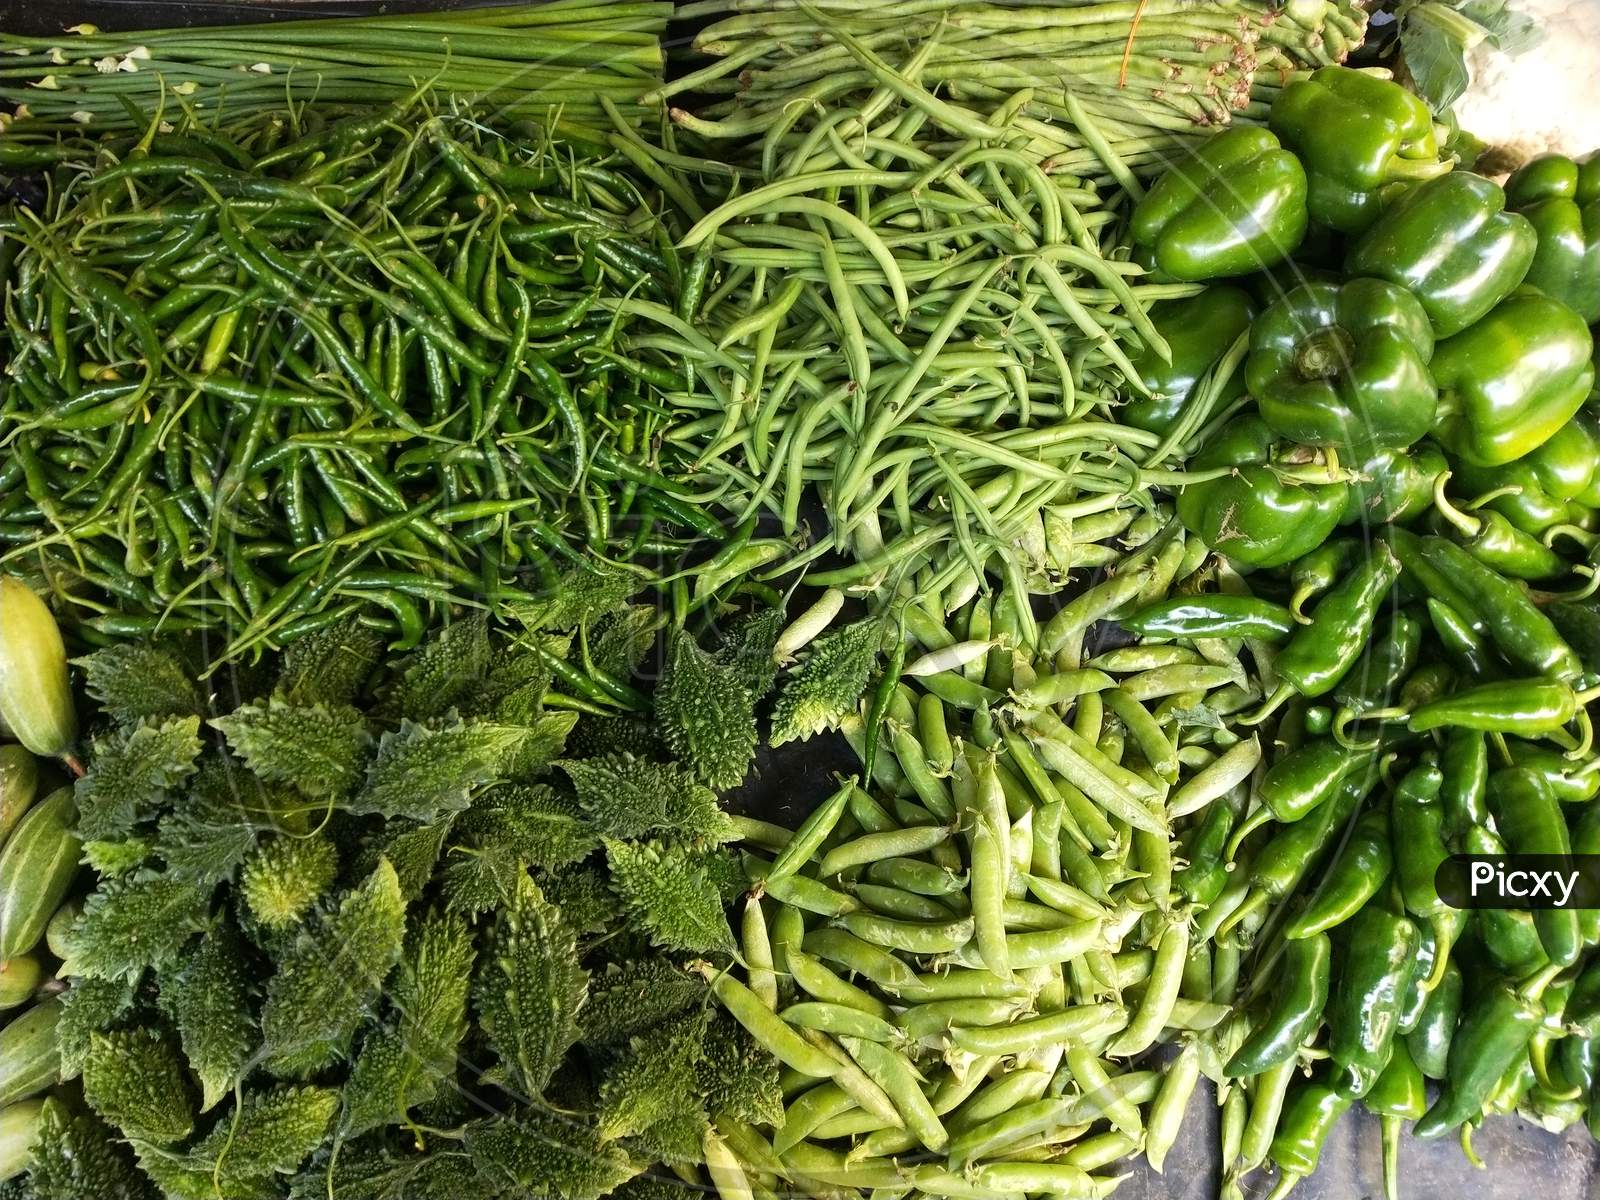 Fresh green vegetables from the market